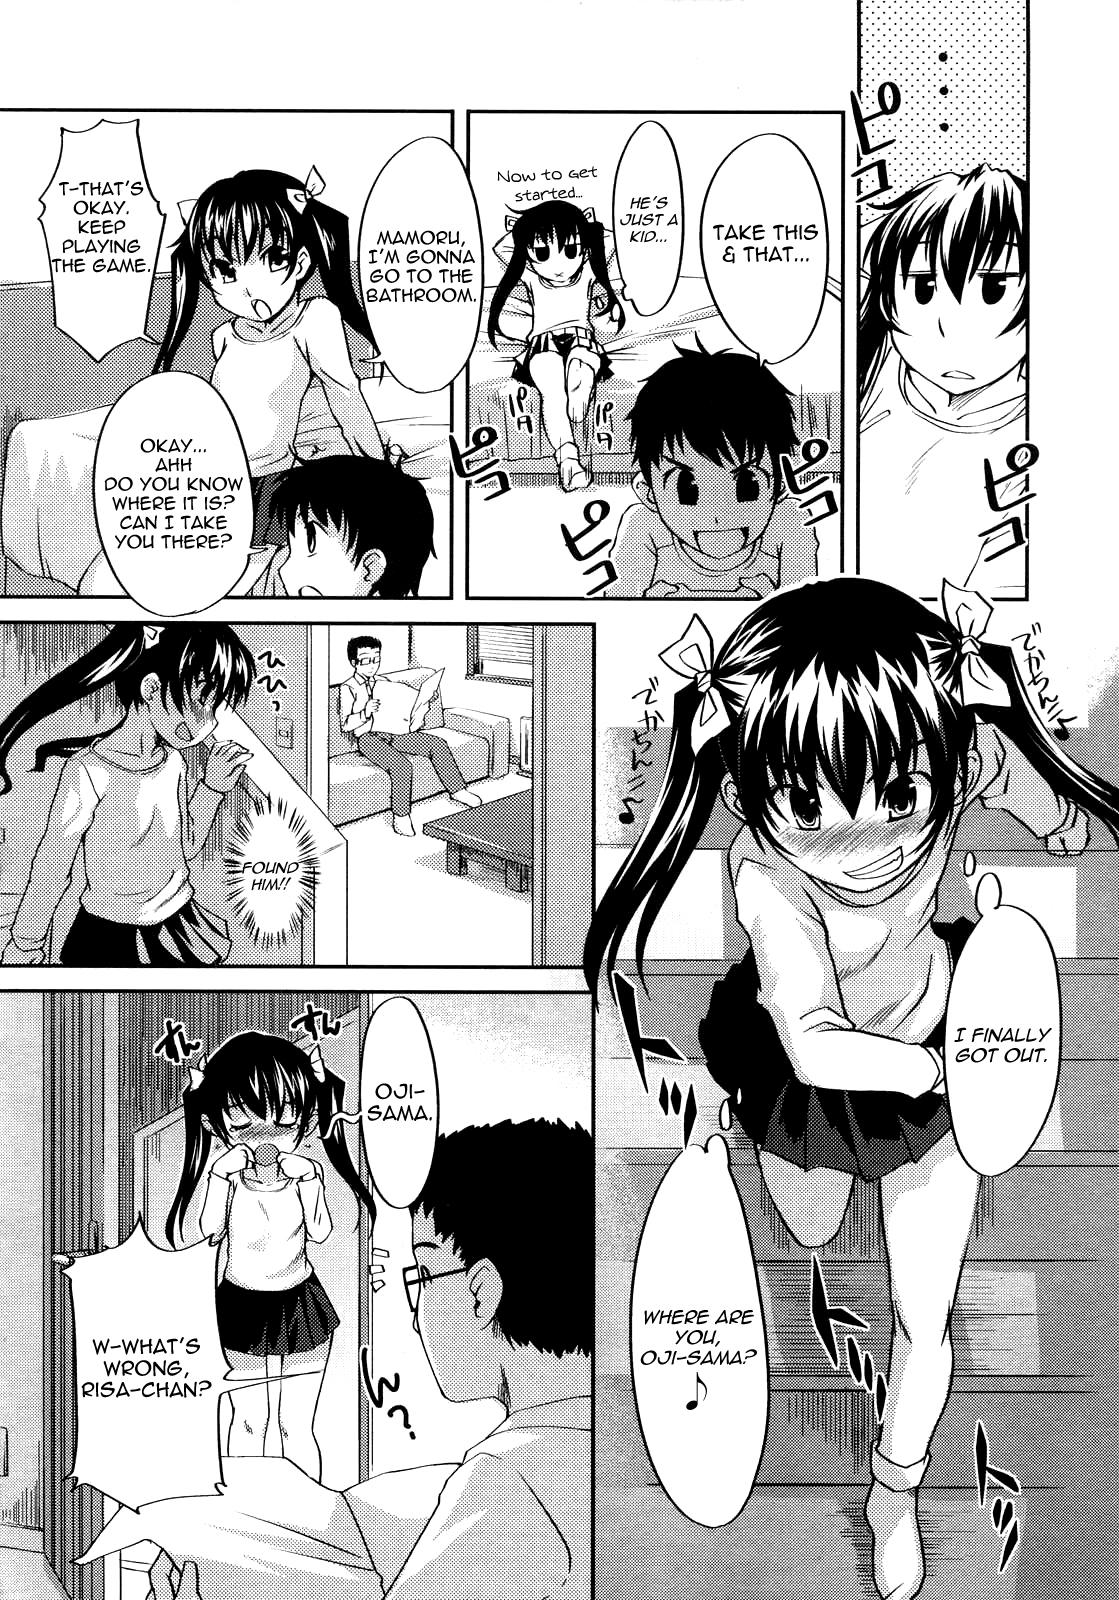 Bitch Otona No Jouken | Requirements of an Adult Sesso - Page 9